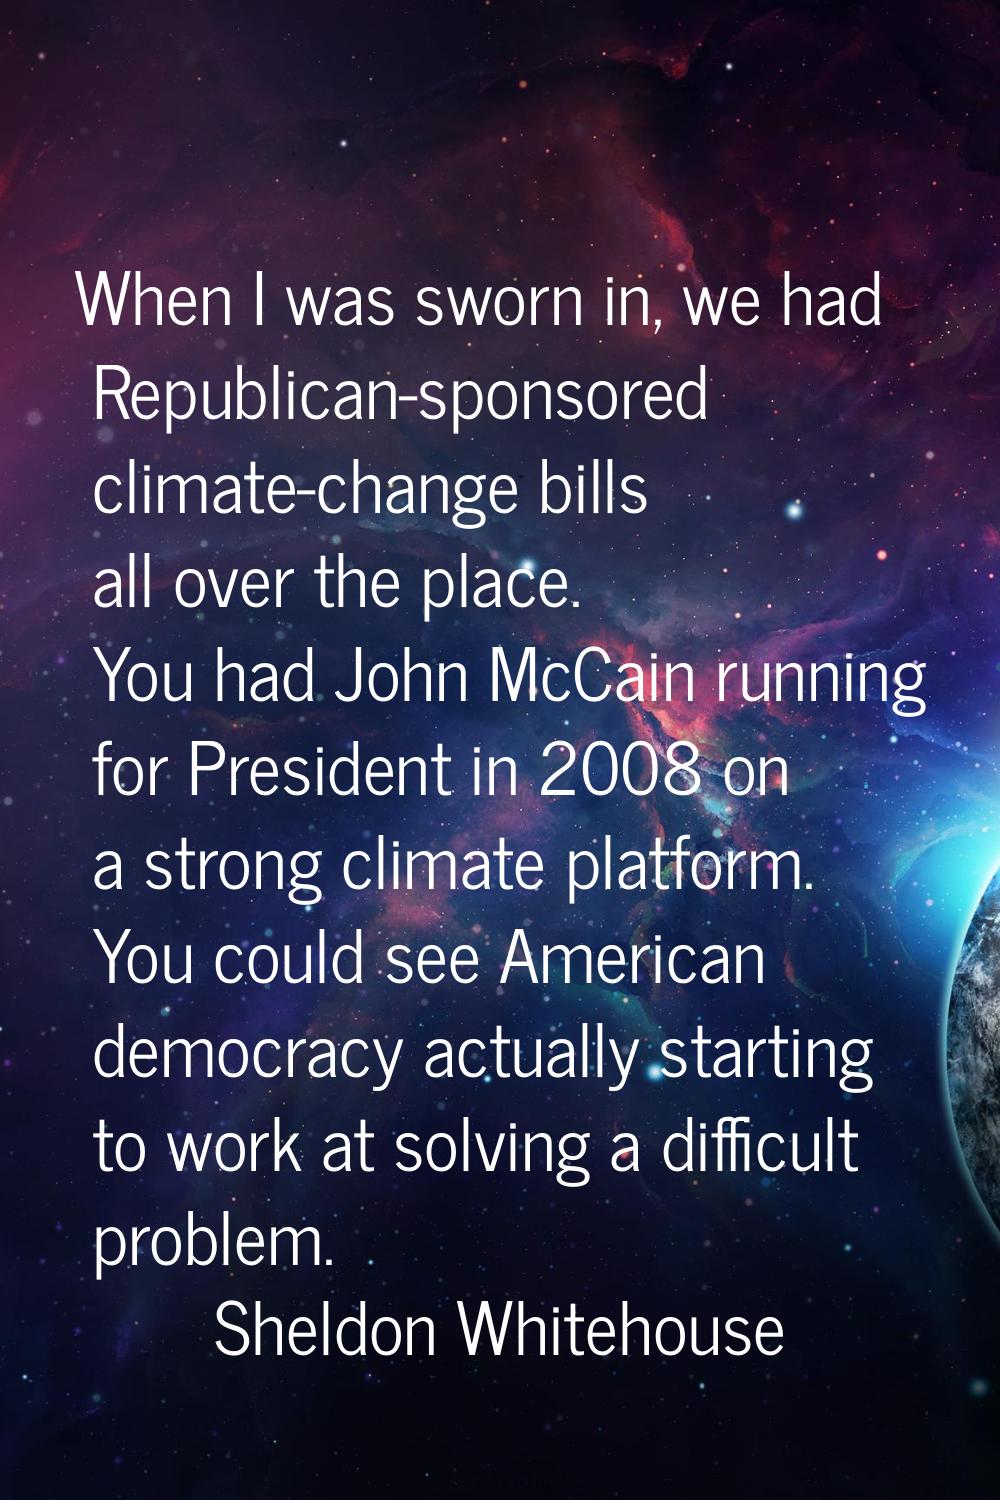 When I was sworn in, we had Republican-sponsored climate-change bills all over the place. You had J